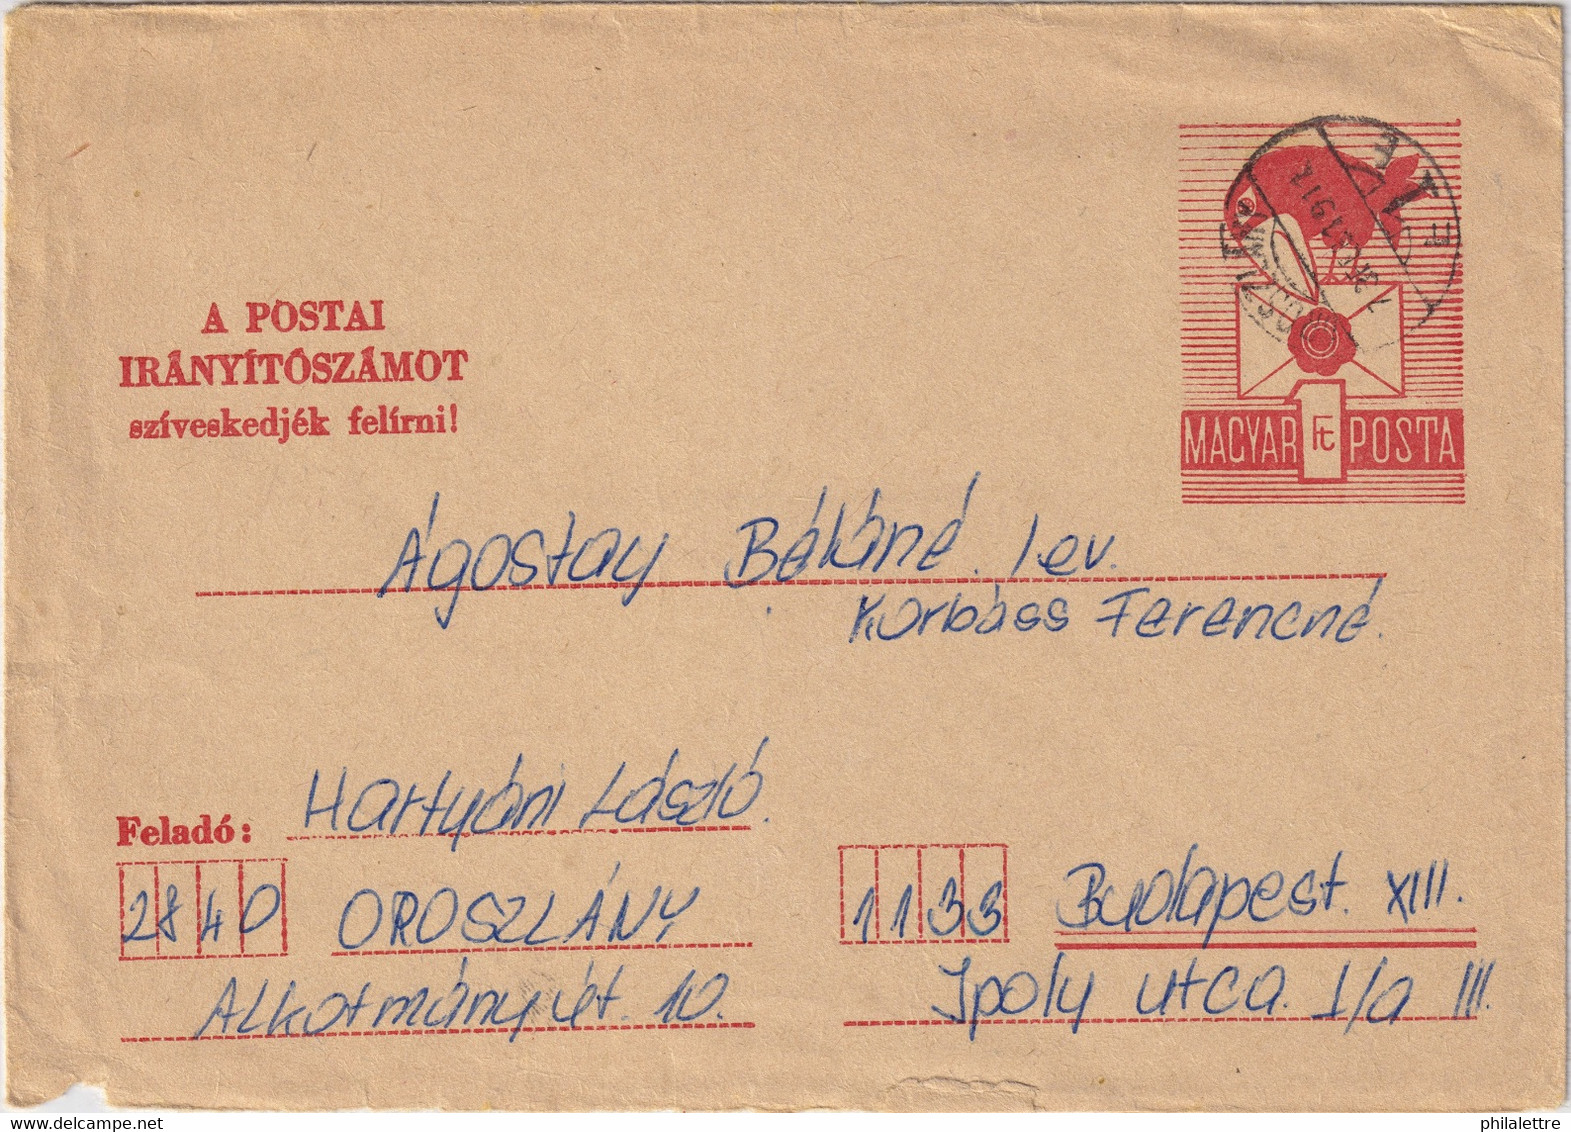 HUNGARY - 1972 1Ft Crow Type I Postal Envelope Mi.U38a - Used In OROSZLÁNY - Lettres & Documents